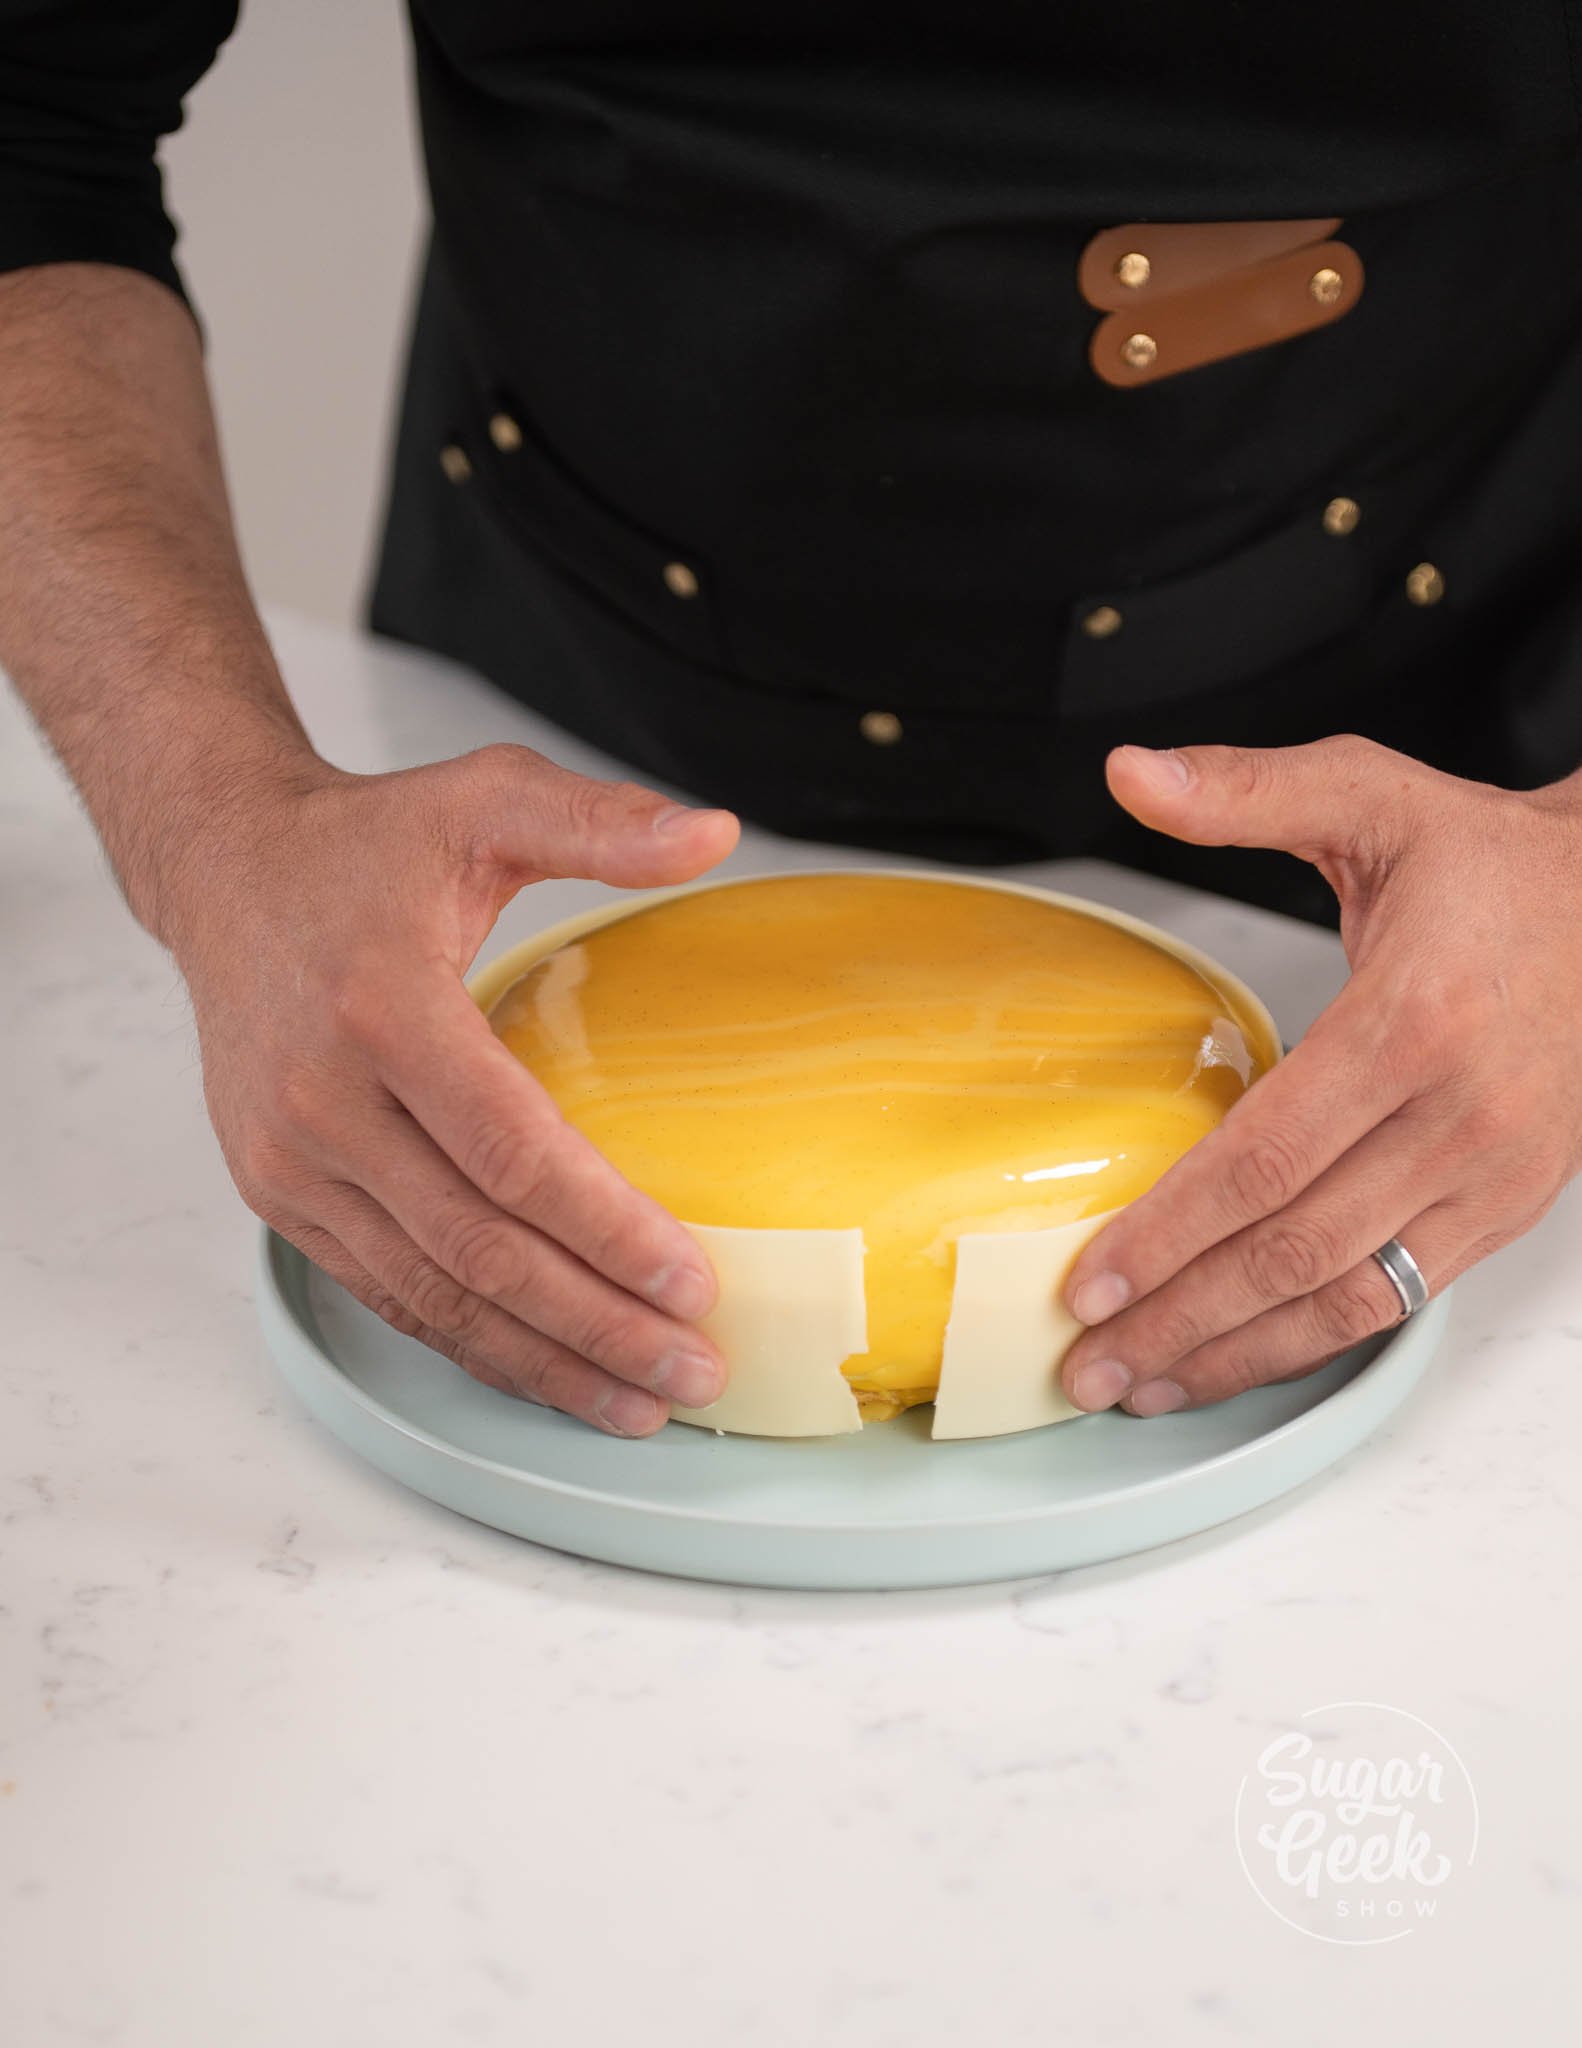 hands placing chocolate ring around entremet.